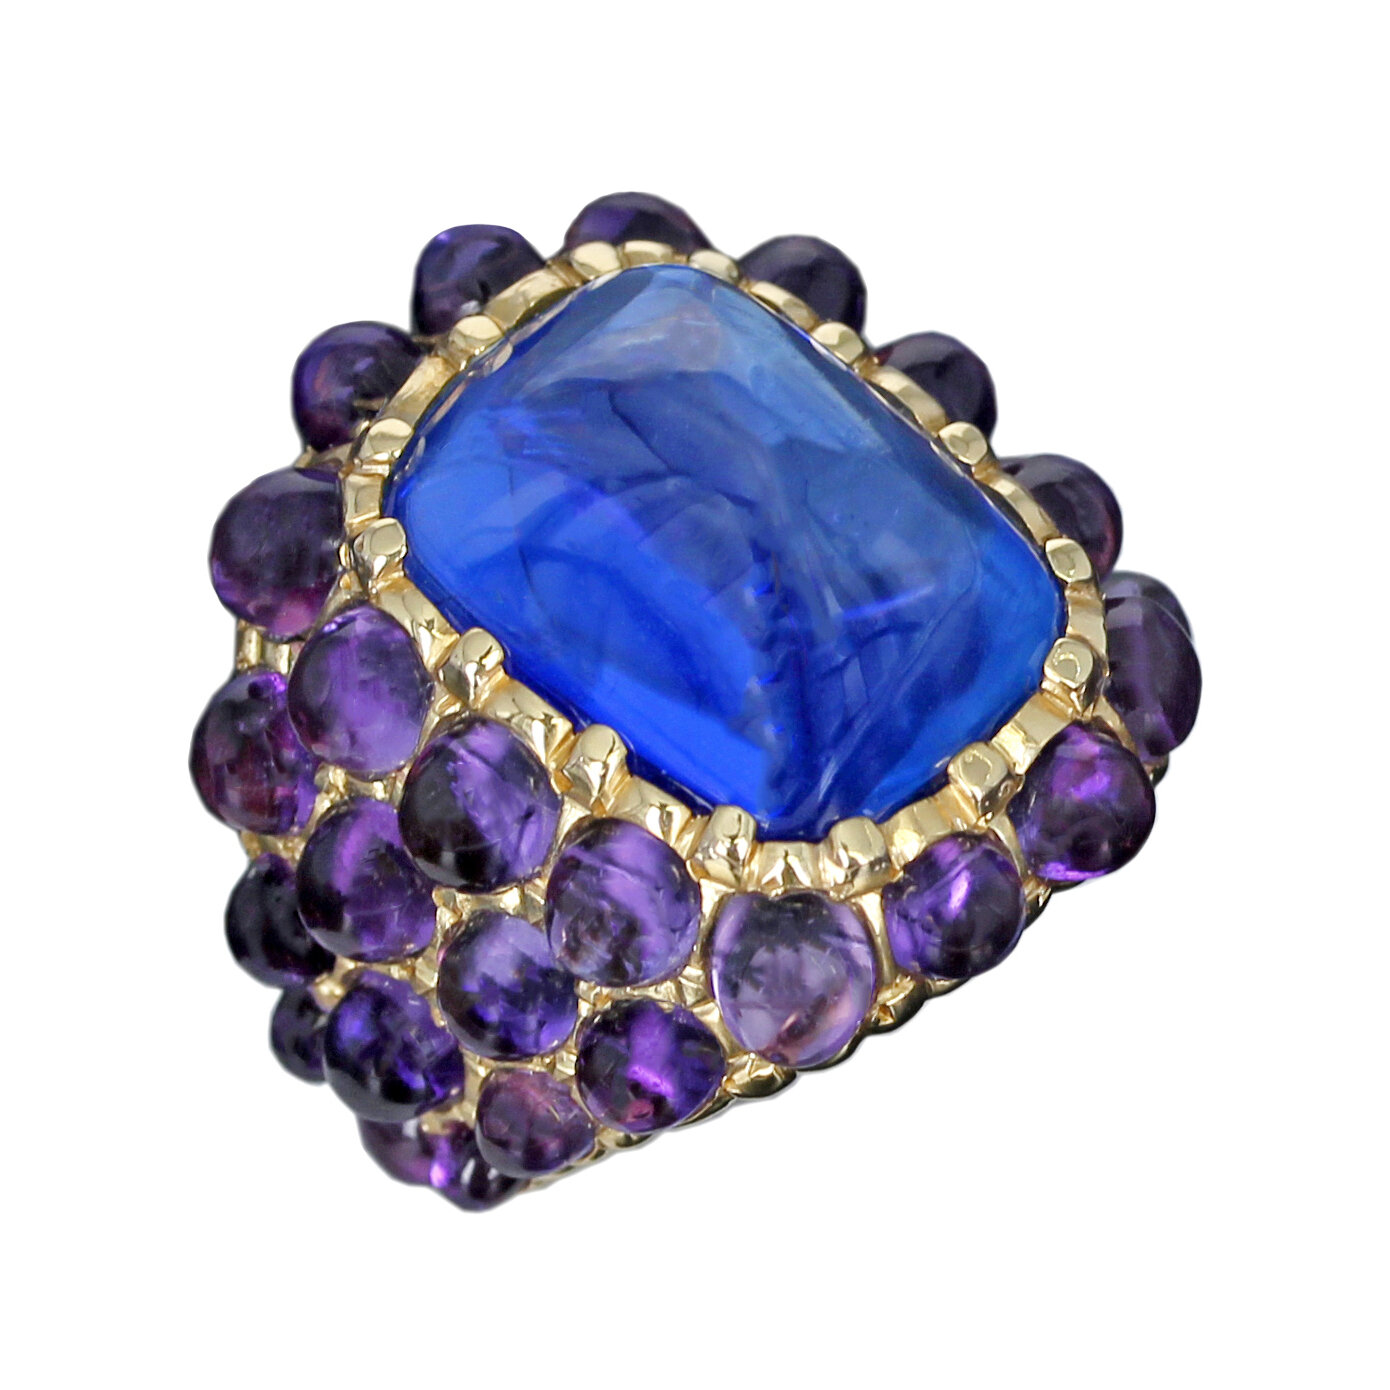 A Kashmir Sapphire Gold Ring Sold for Over 2 Million Euros at an Aucti